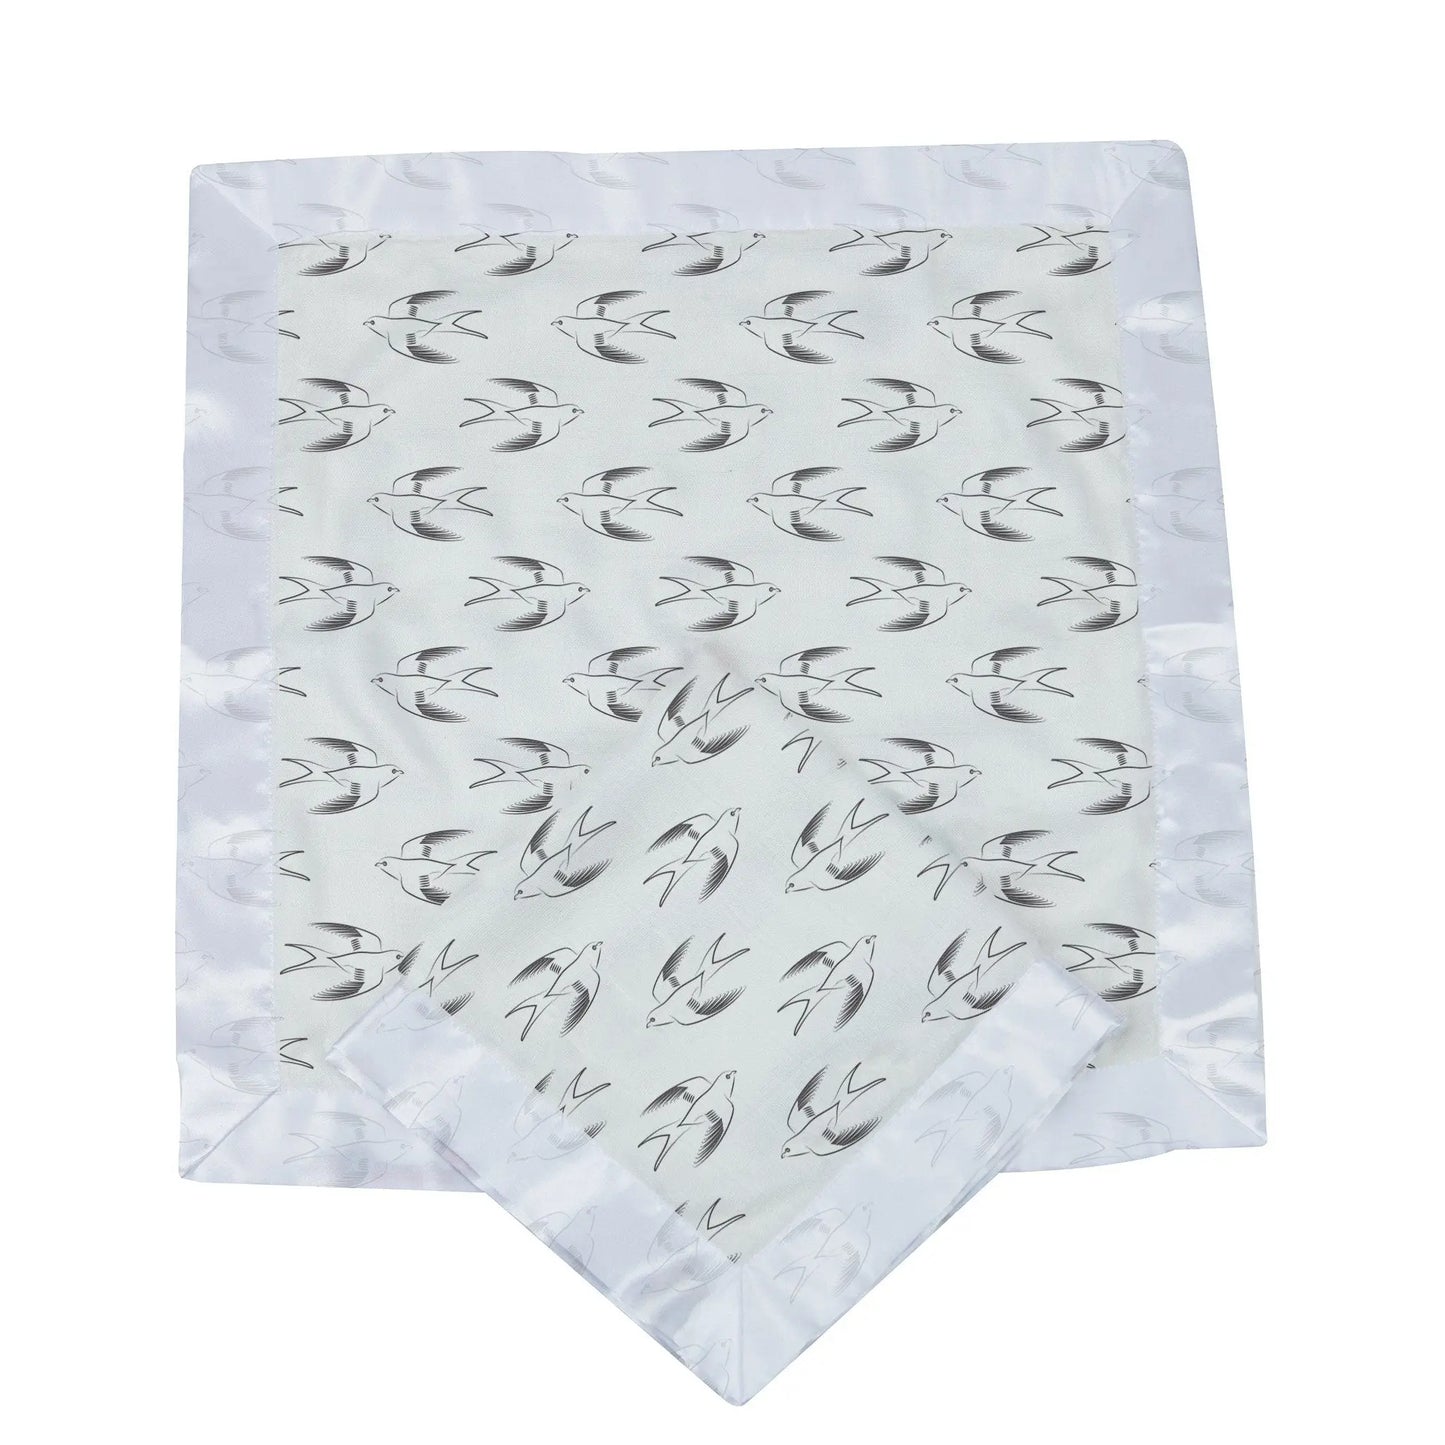 Security Blanket 2PK | Bamboo Fabric - Sparrows Newcastle Classics